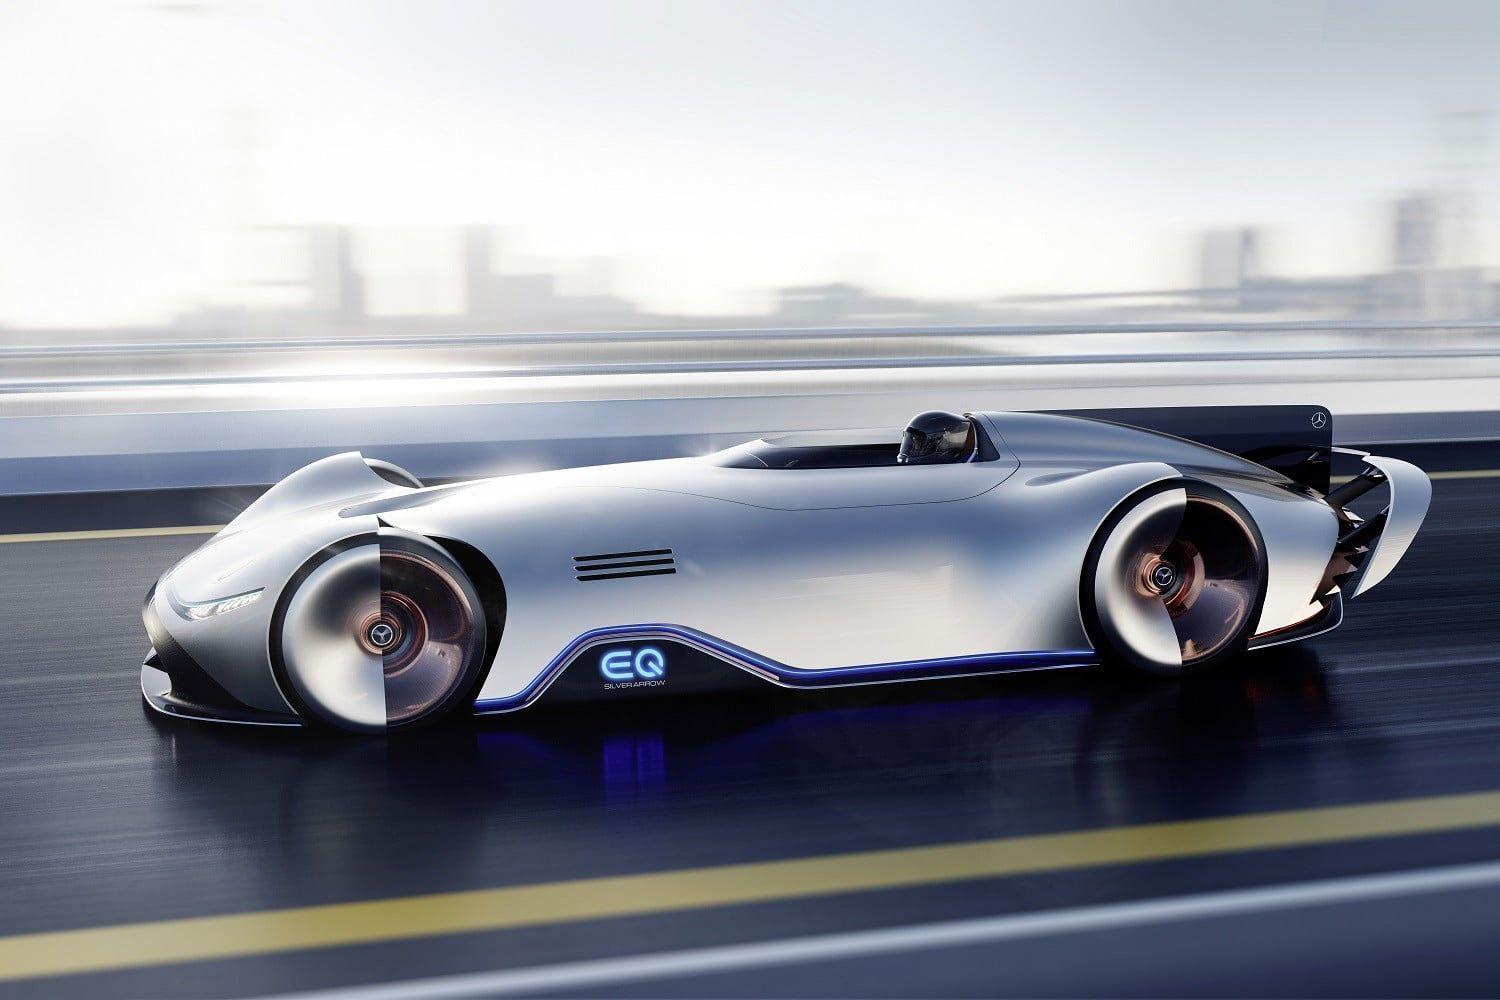 Two Silver Arrows Vehicle Logo - Mercedes-Benz EQ Silver Arrow Concept Blends Heritage and Future ...